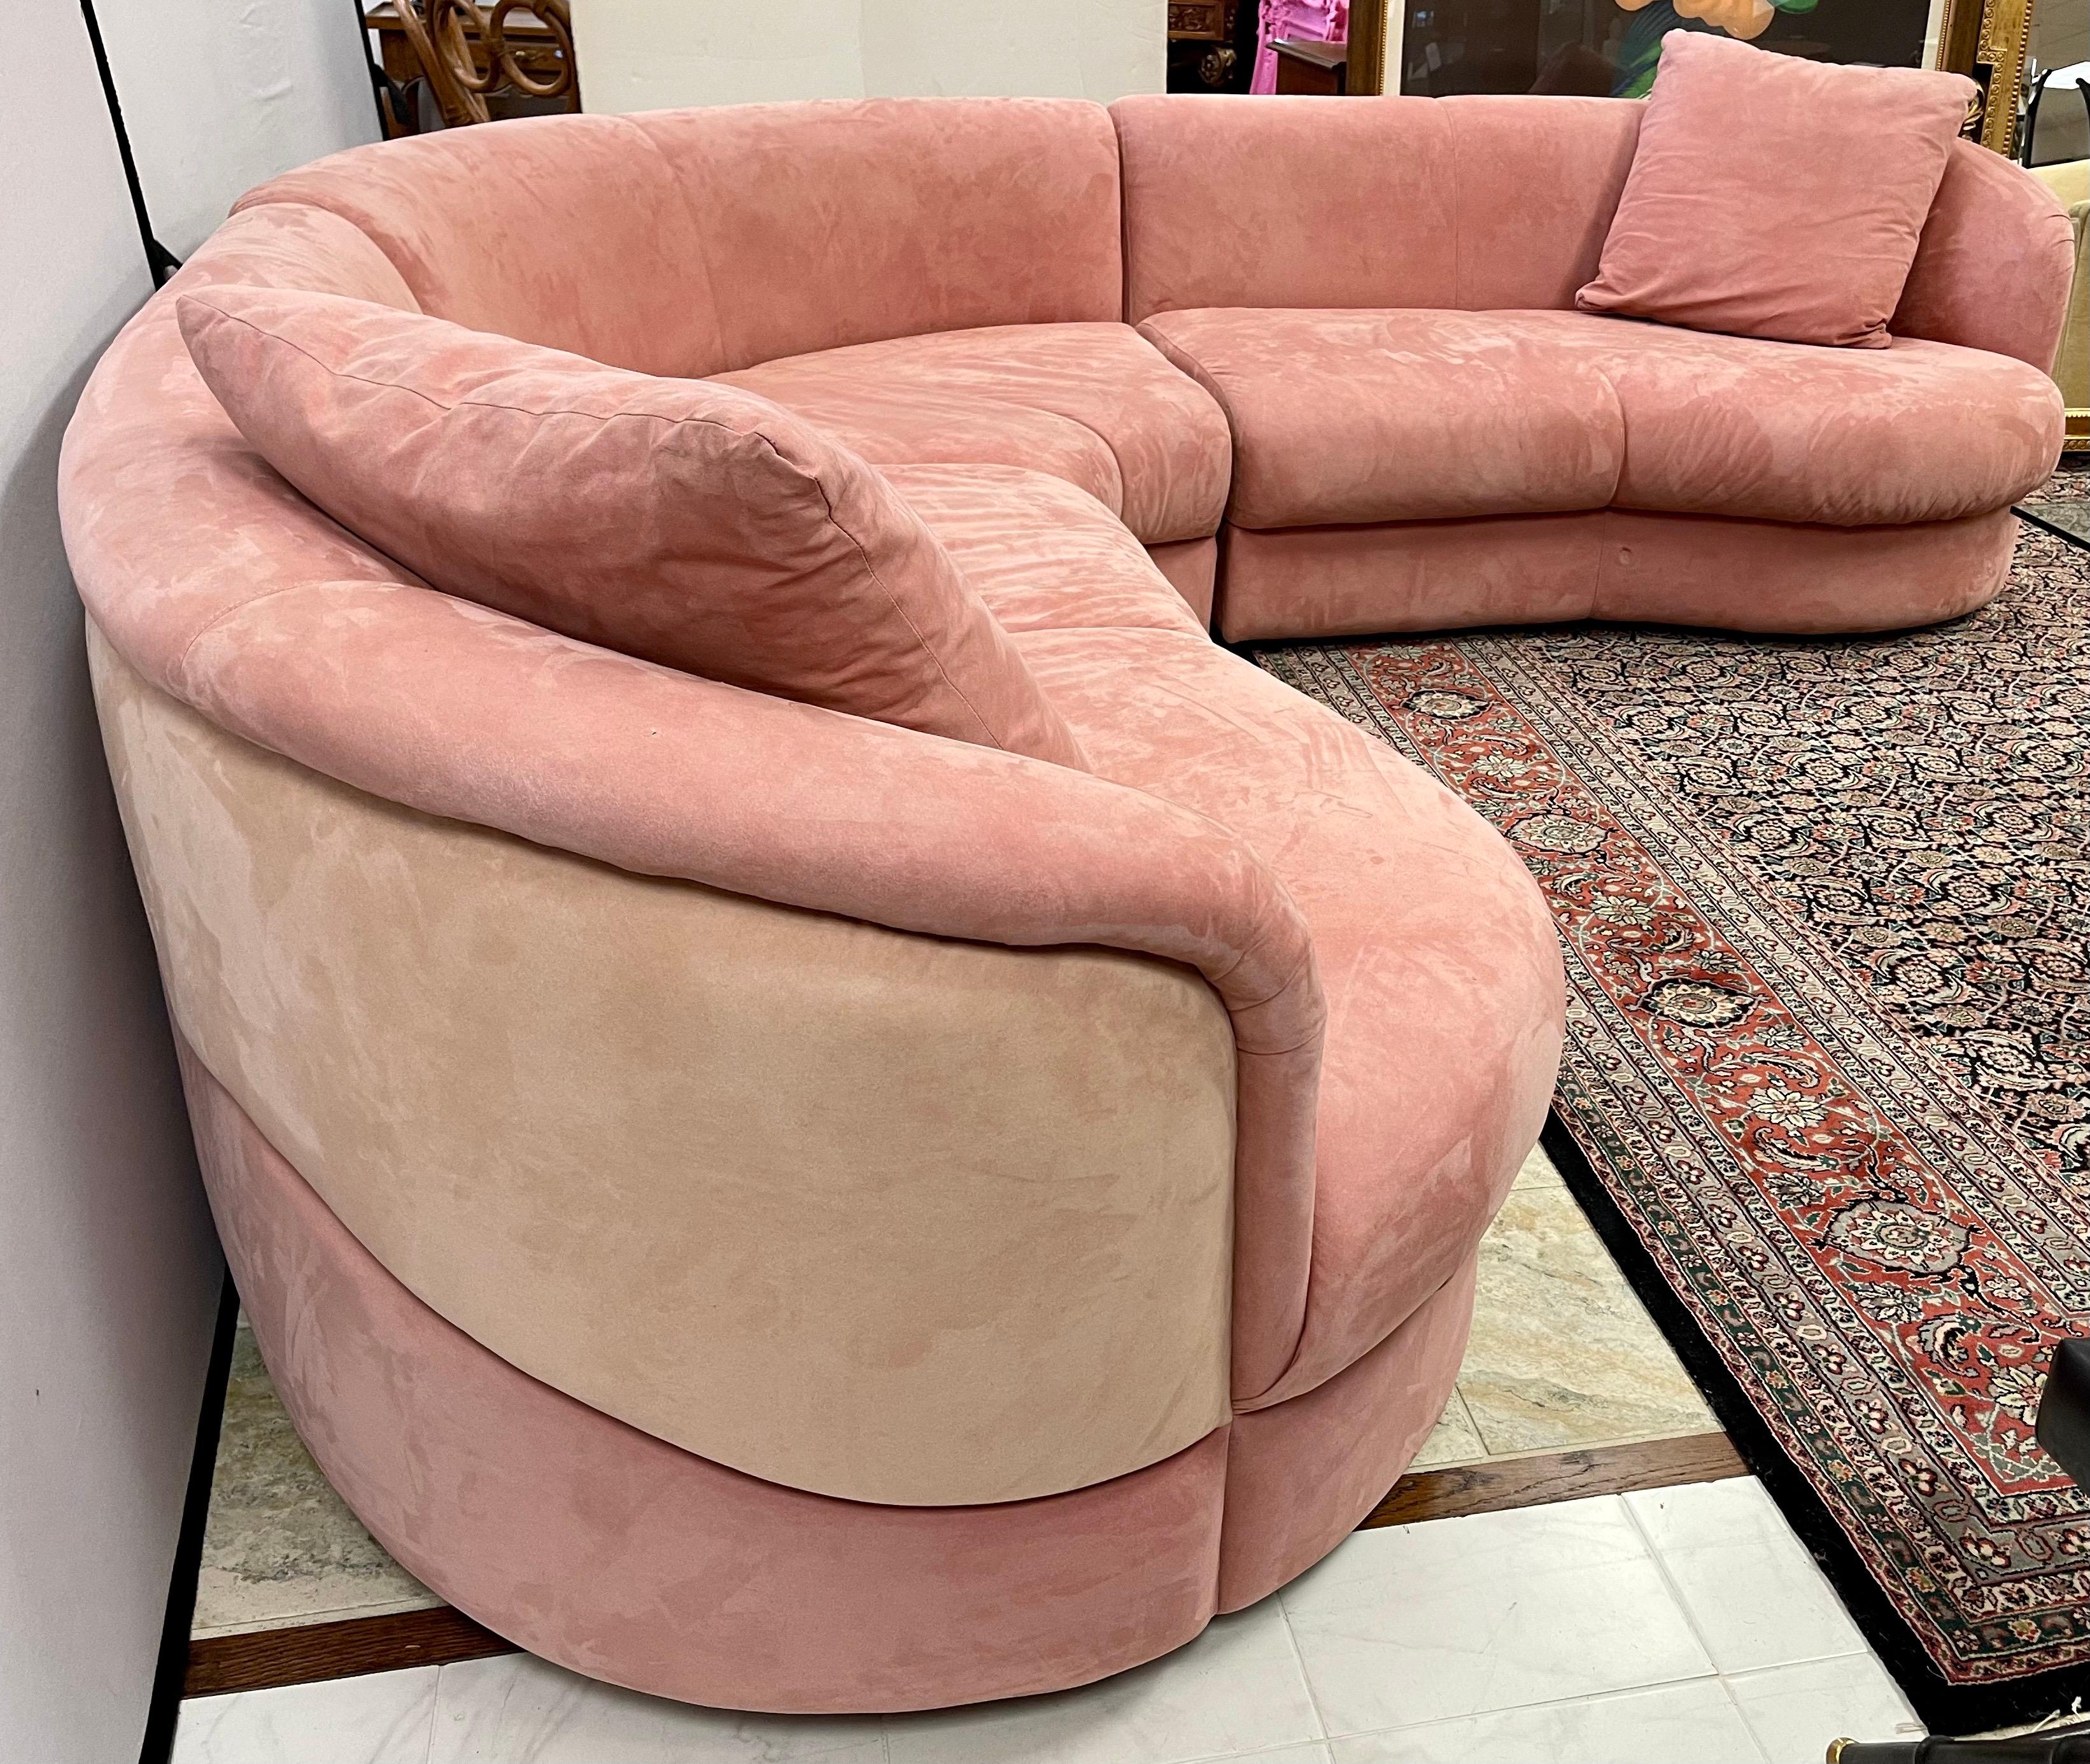 American Directional Mid-Century Biomorphic Rose Color Suede Leather Cloud Sofa Sectional